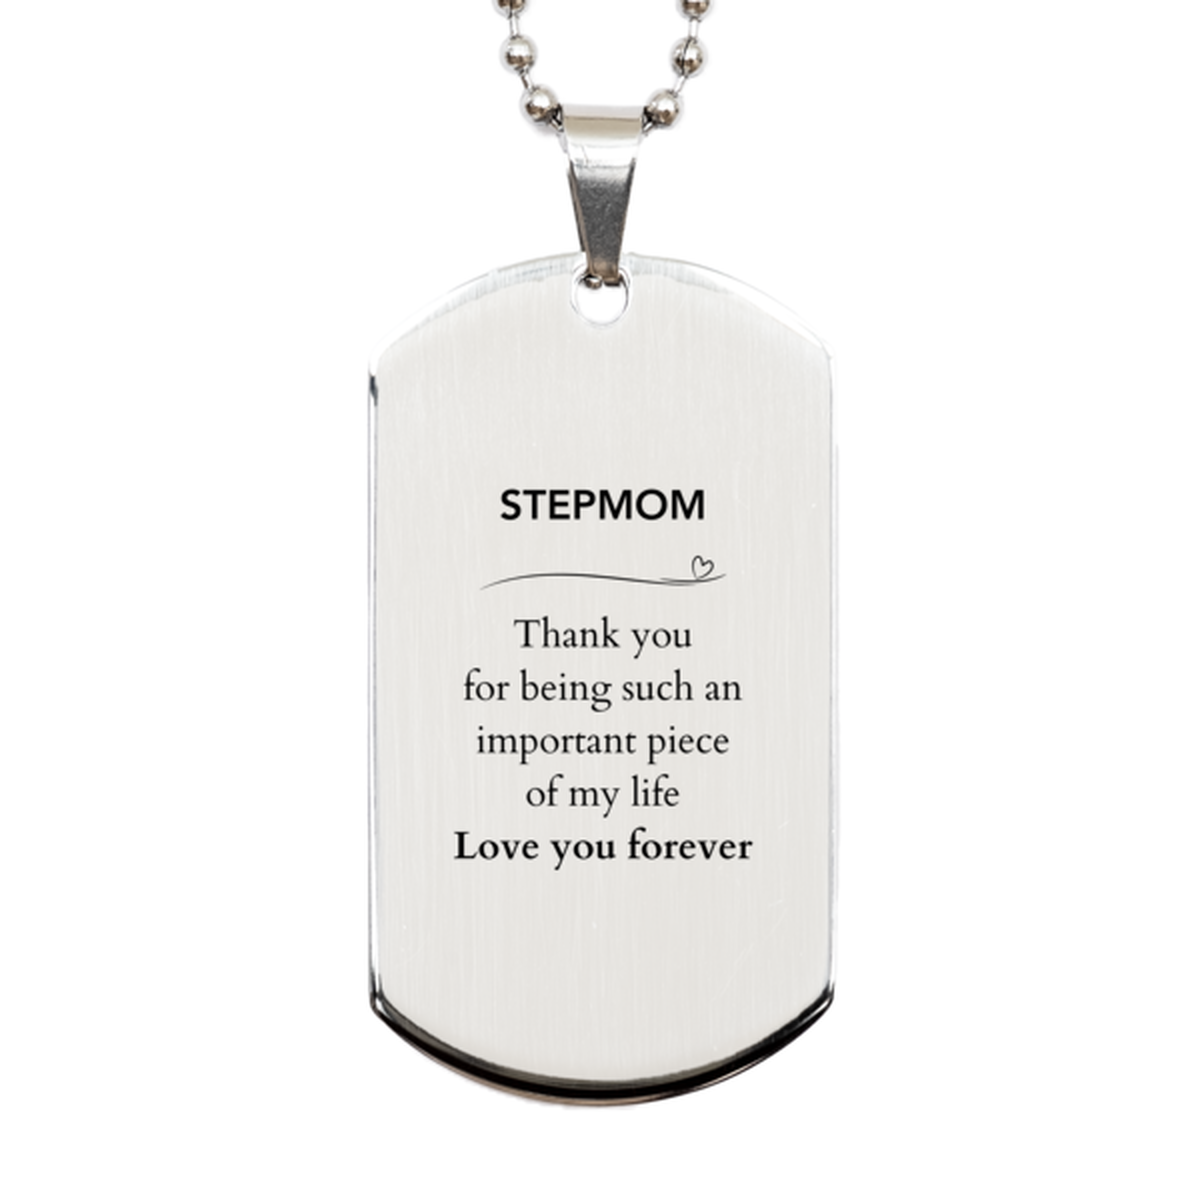 Appropriate Stepmom Silver Dog Tag Epic Birthday Gifts for Stepmom Thank you for being such an important piece of my life Stepmom Christmas Mothers Fathers Day